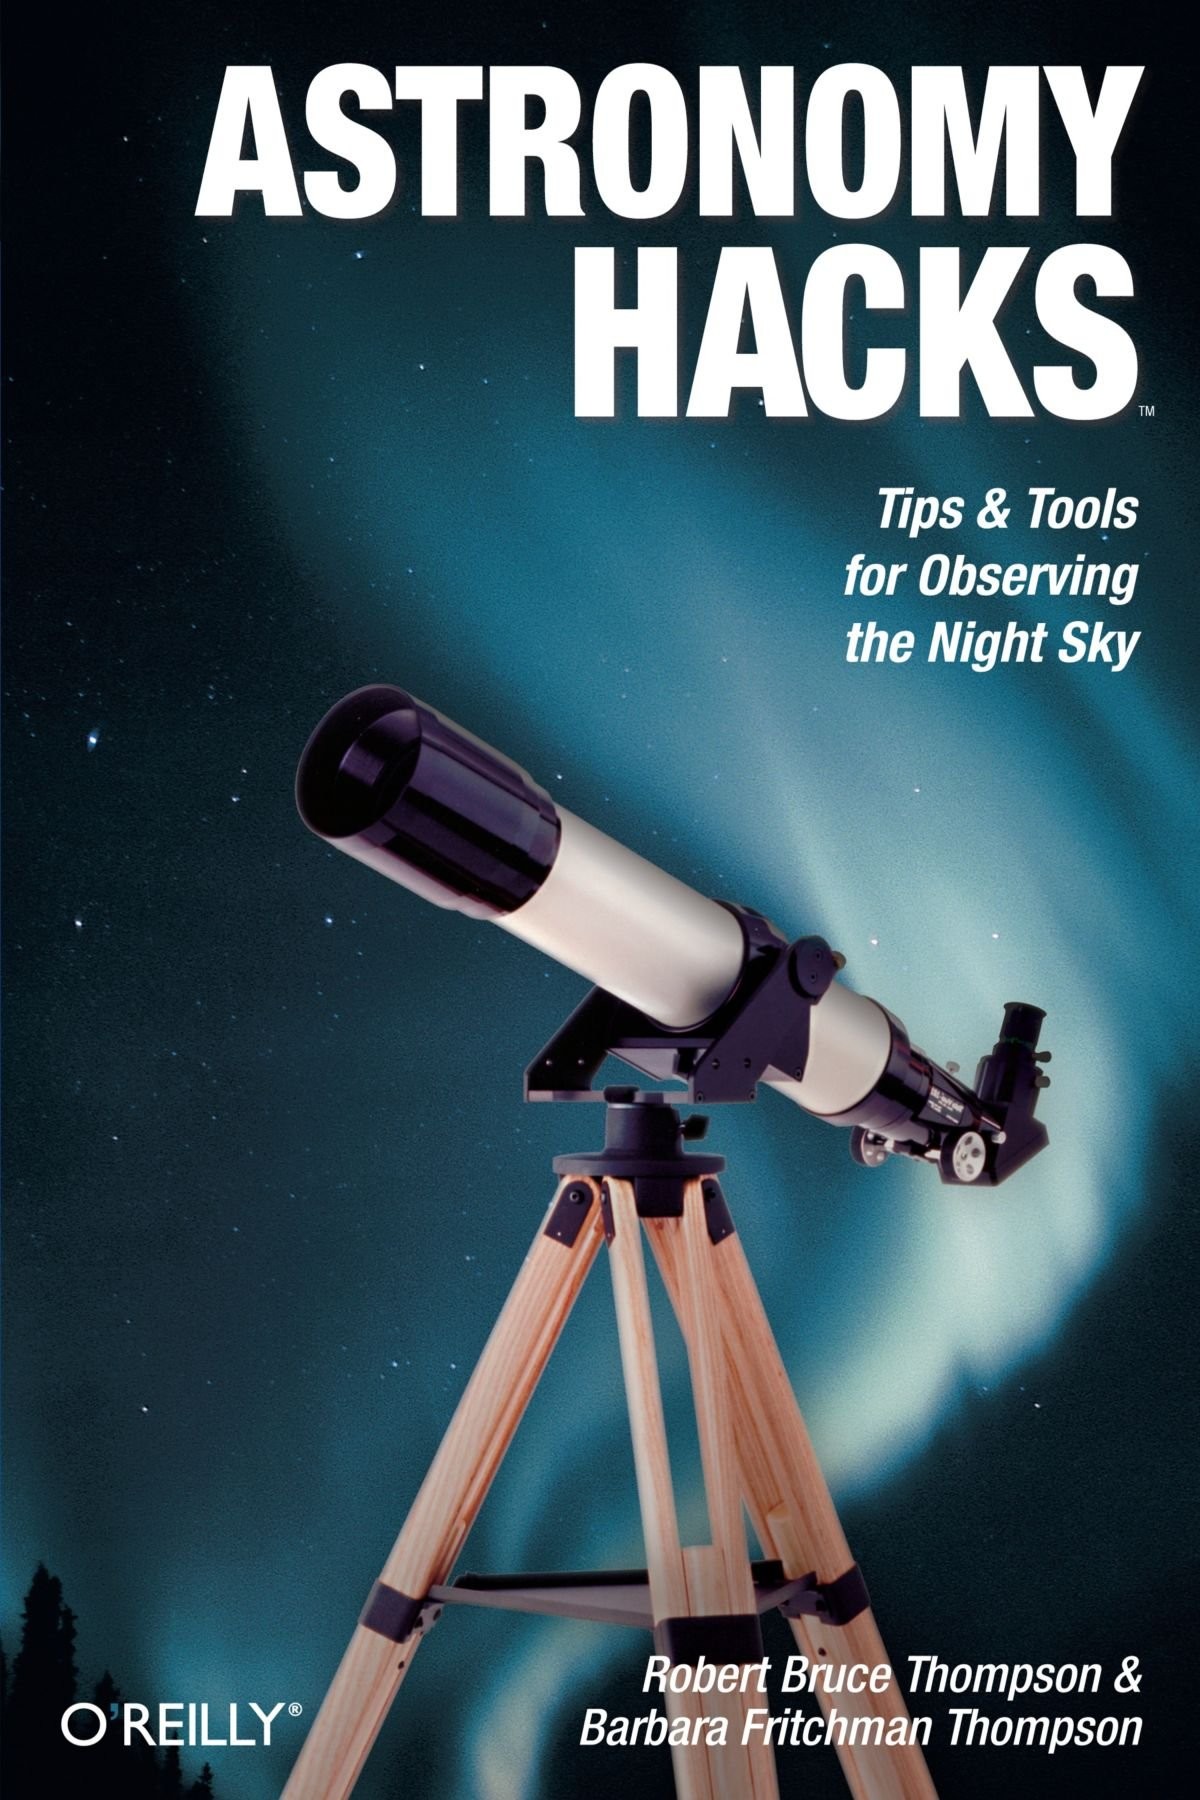 Astronomy Hacks Tips and Tools for Observing the Night Sky by Robert Bruce Thomson & Barbara Fritchman Thomson